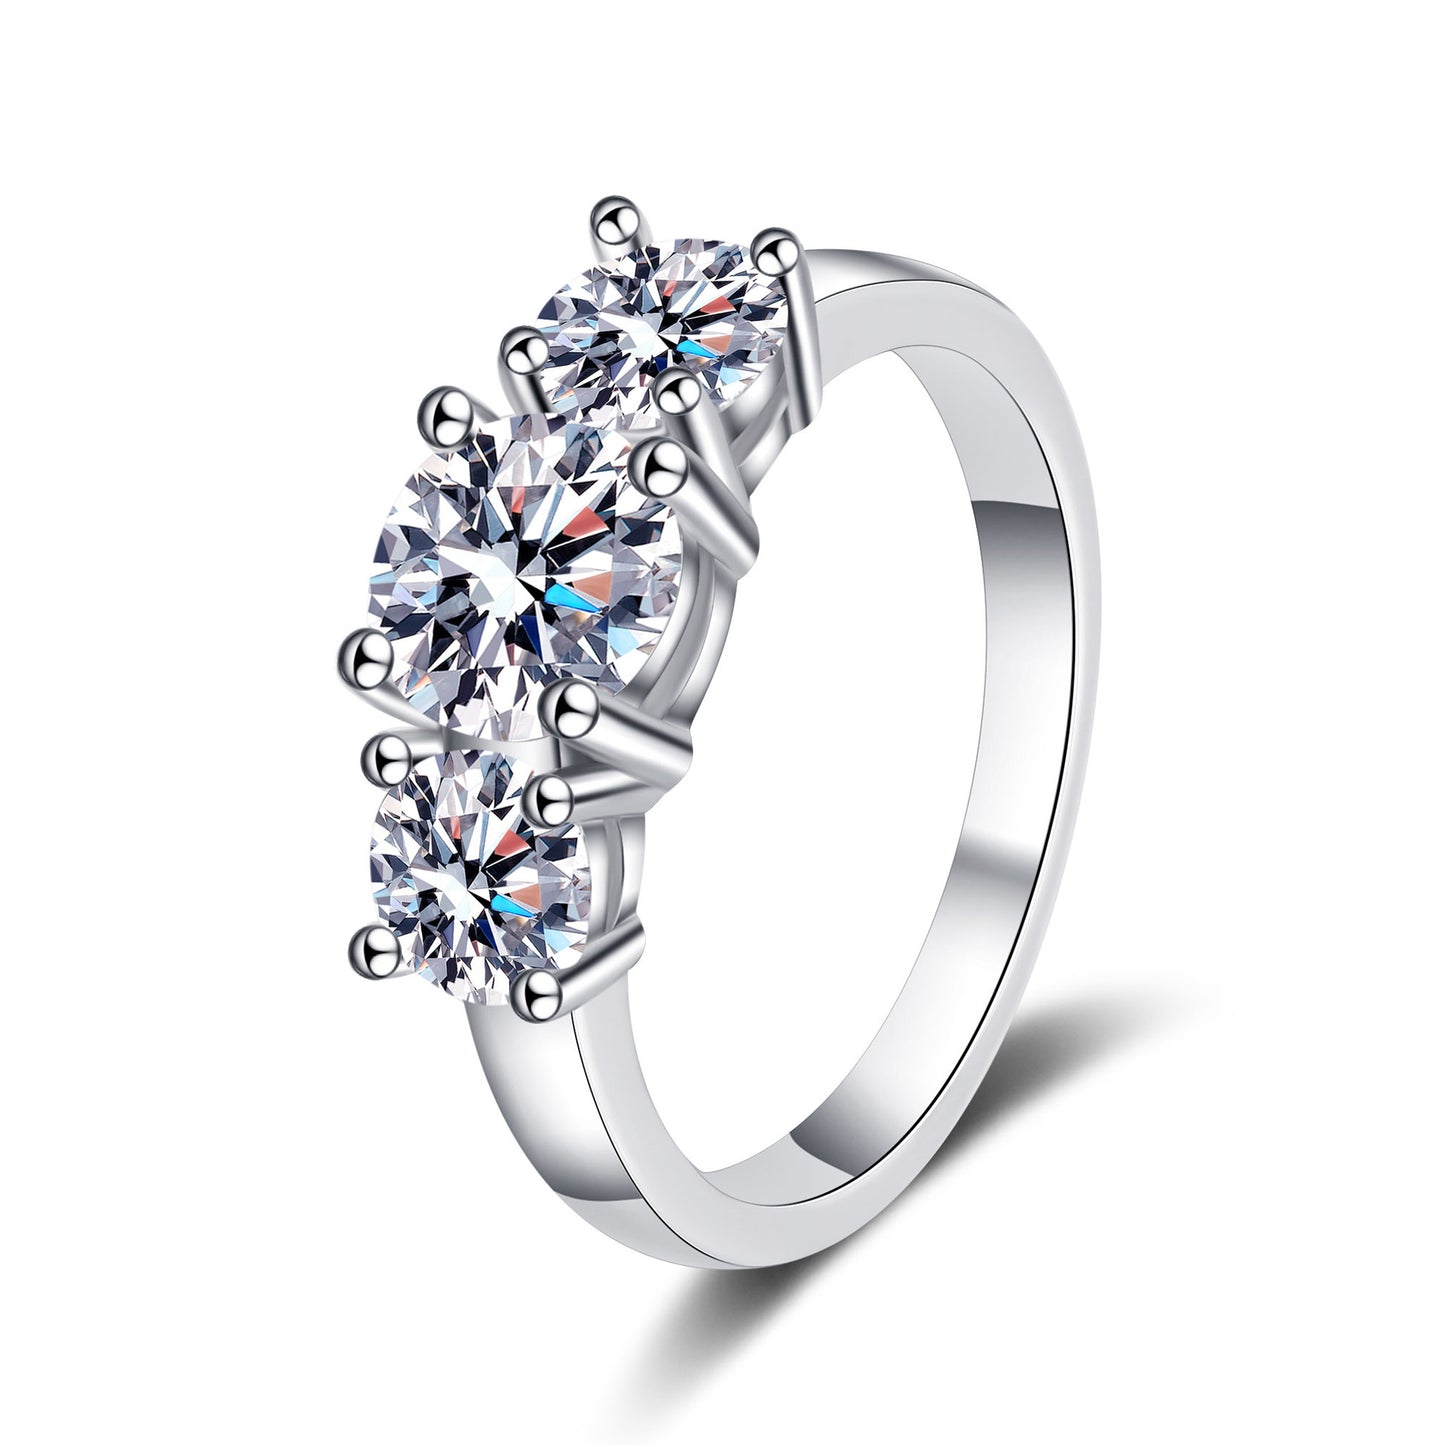 Fashionable S925 sterling silver moissanite ring #MR00021